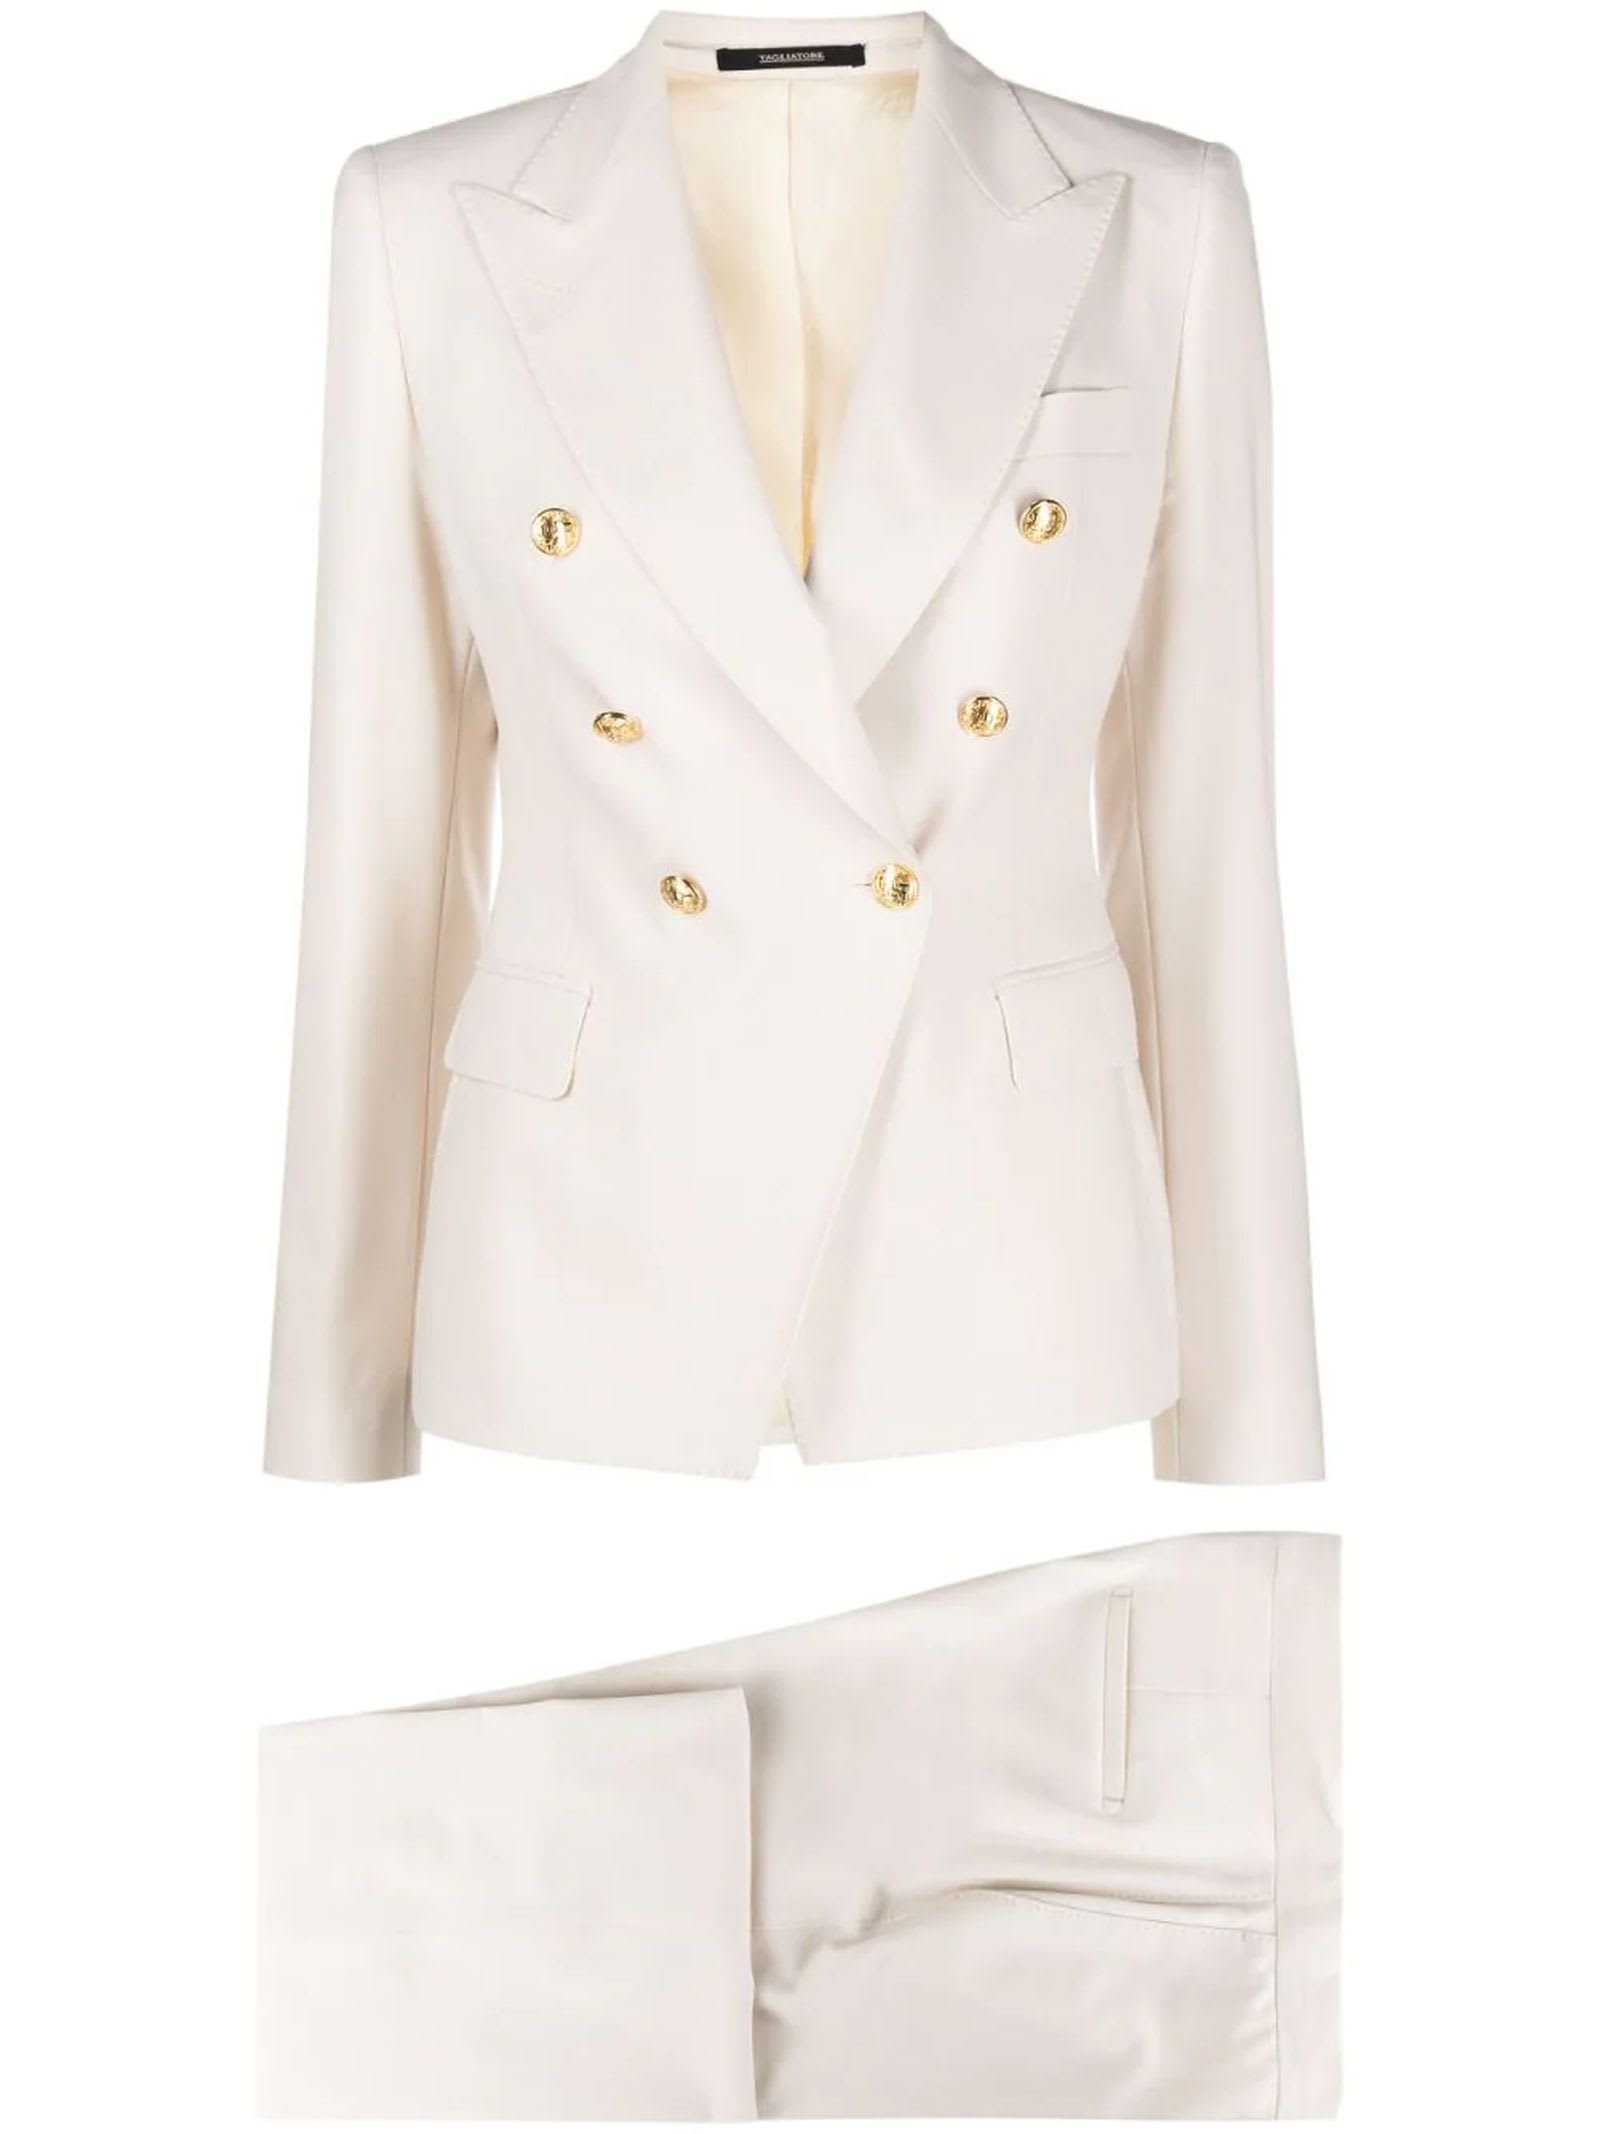 TAGLIATORE LIGHT BEIGE DOUBLE-BREASTED TAILORED SUIT